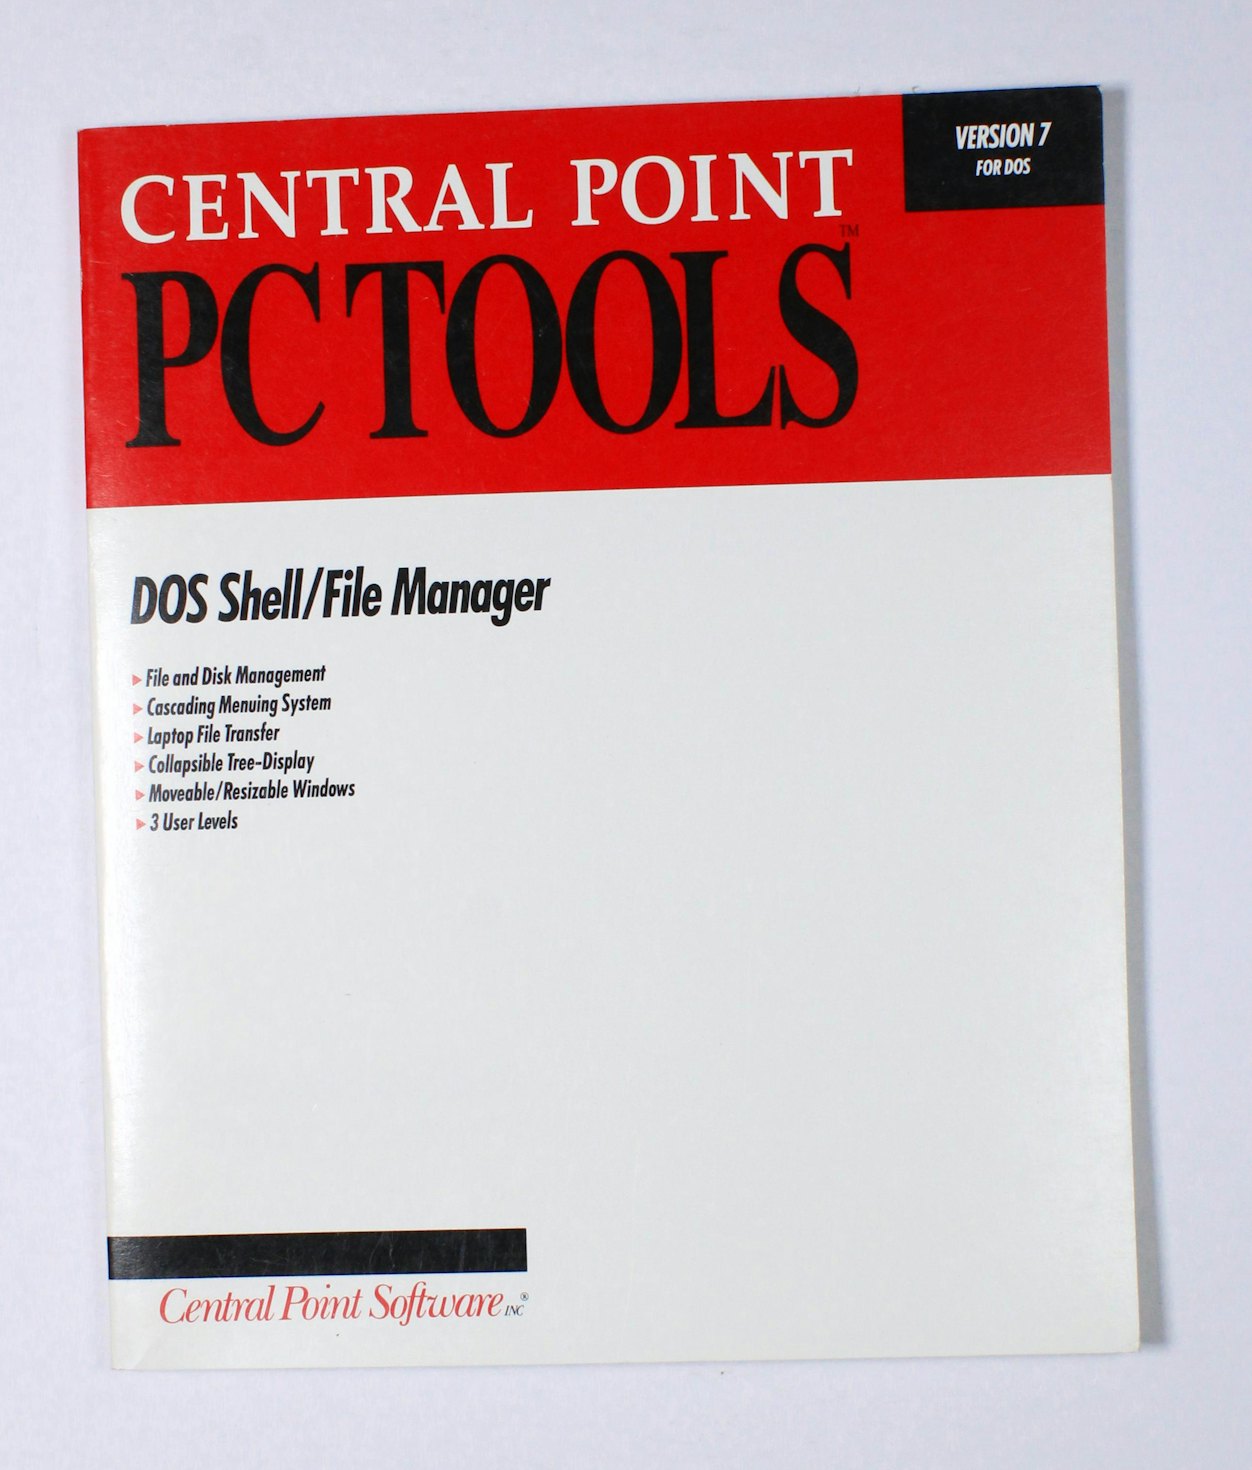 Central Point PC Tools: DOS Shell/ File Manager